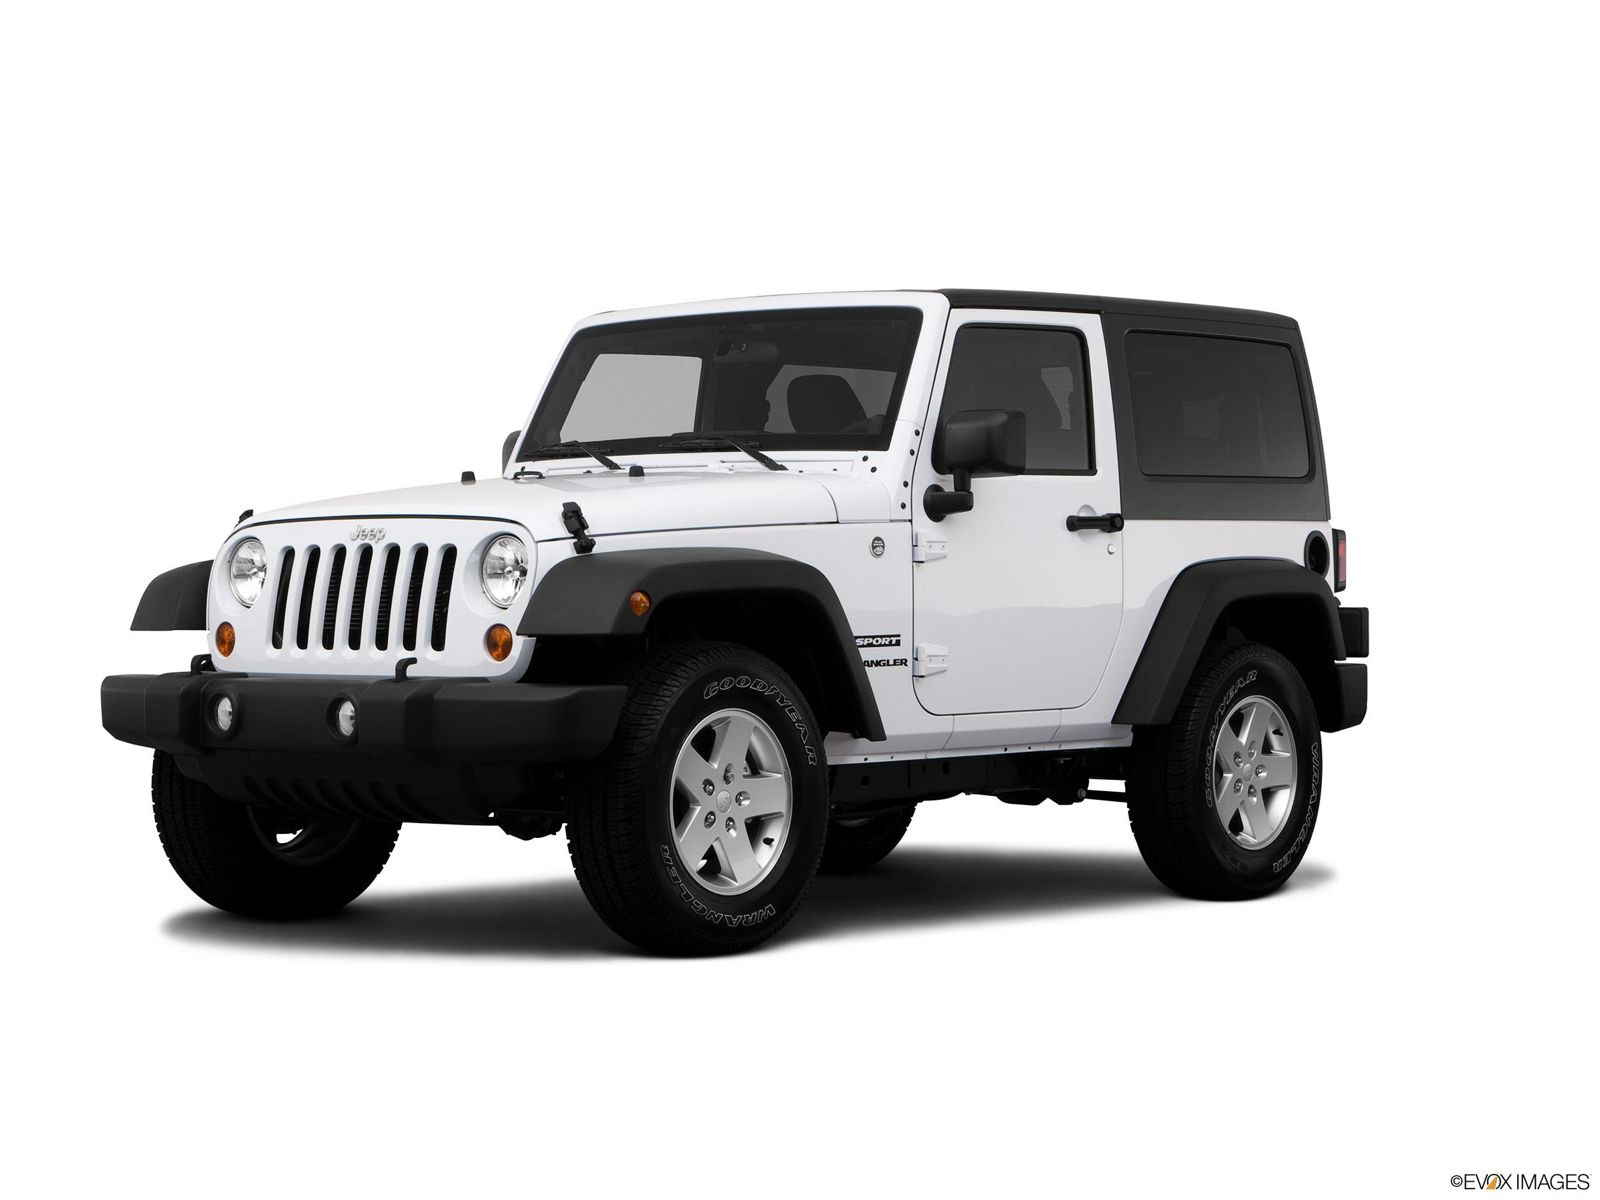 2012 Jeep Wrangler Research, Photos, Specs and Expertise | CarMax